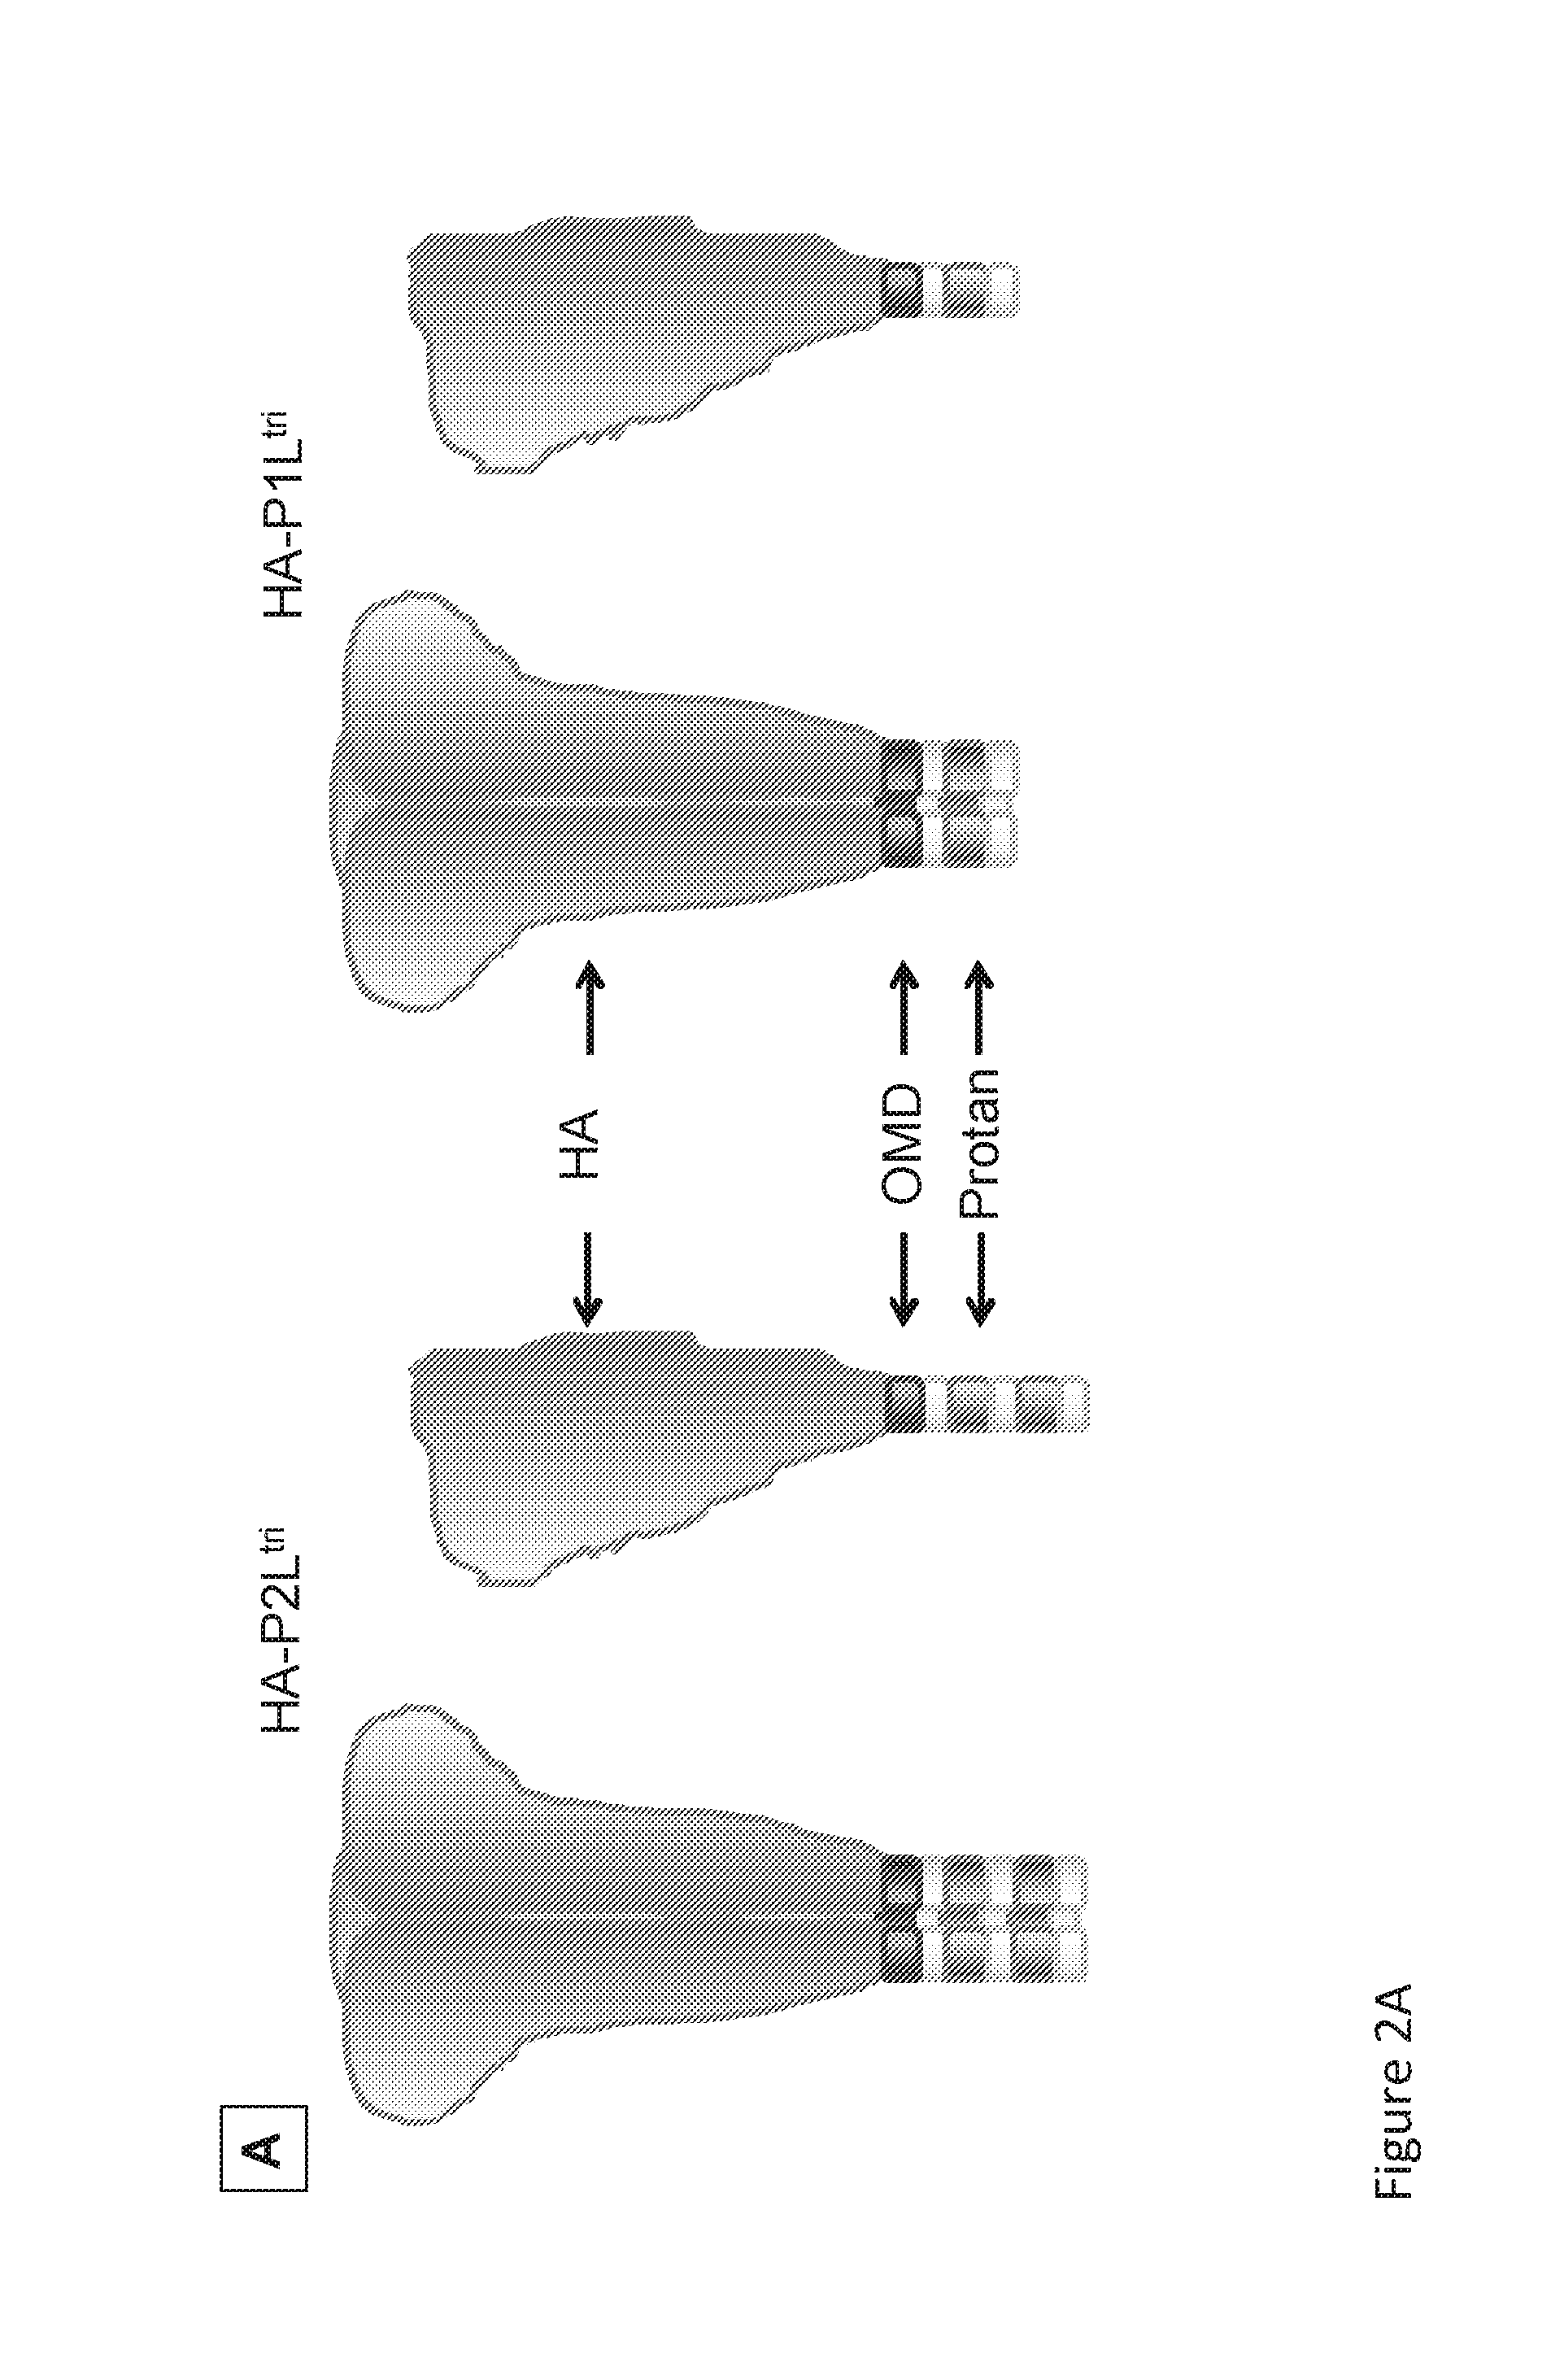 Immunogenic compositions in particulate form and methods for producing the same